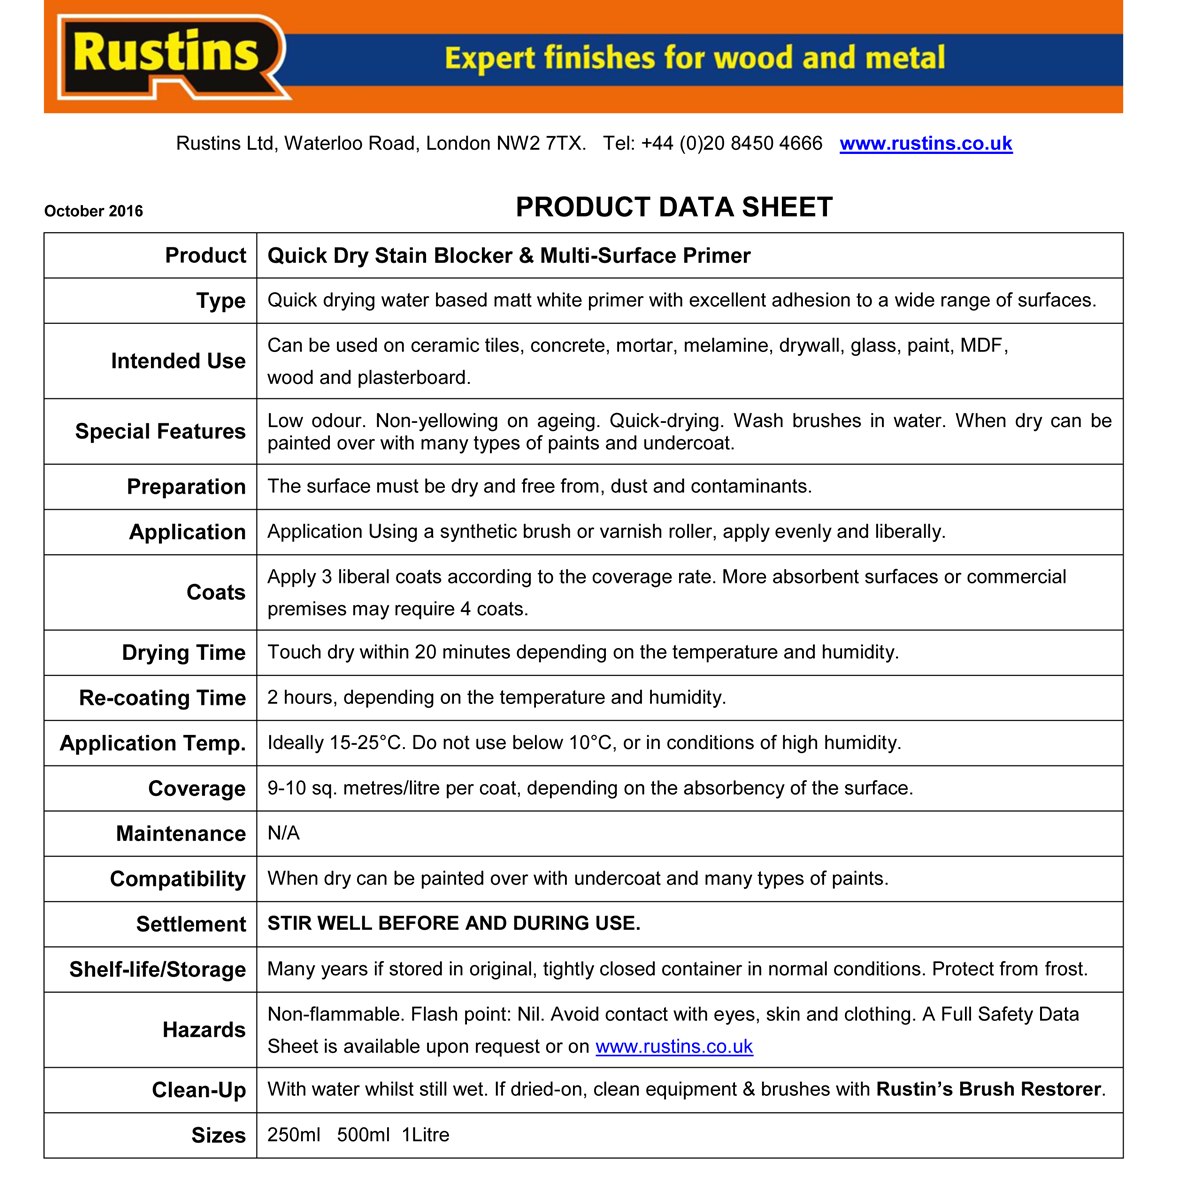 Rustins Quick Dry Stain Blocker Multi-Surface Primer Usage Instructions